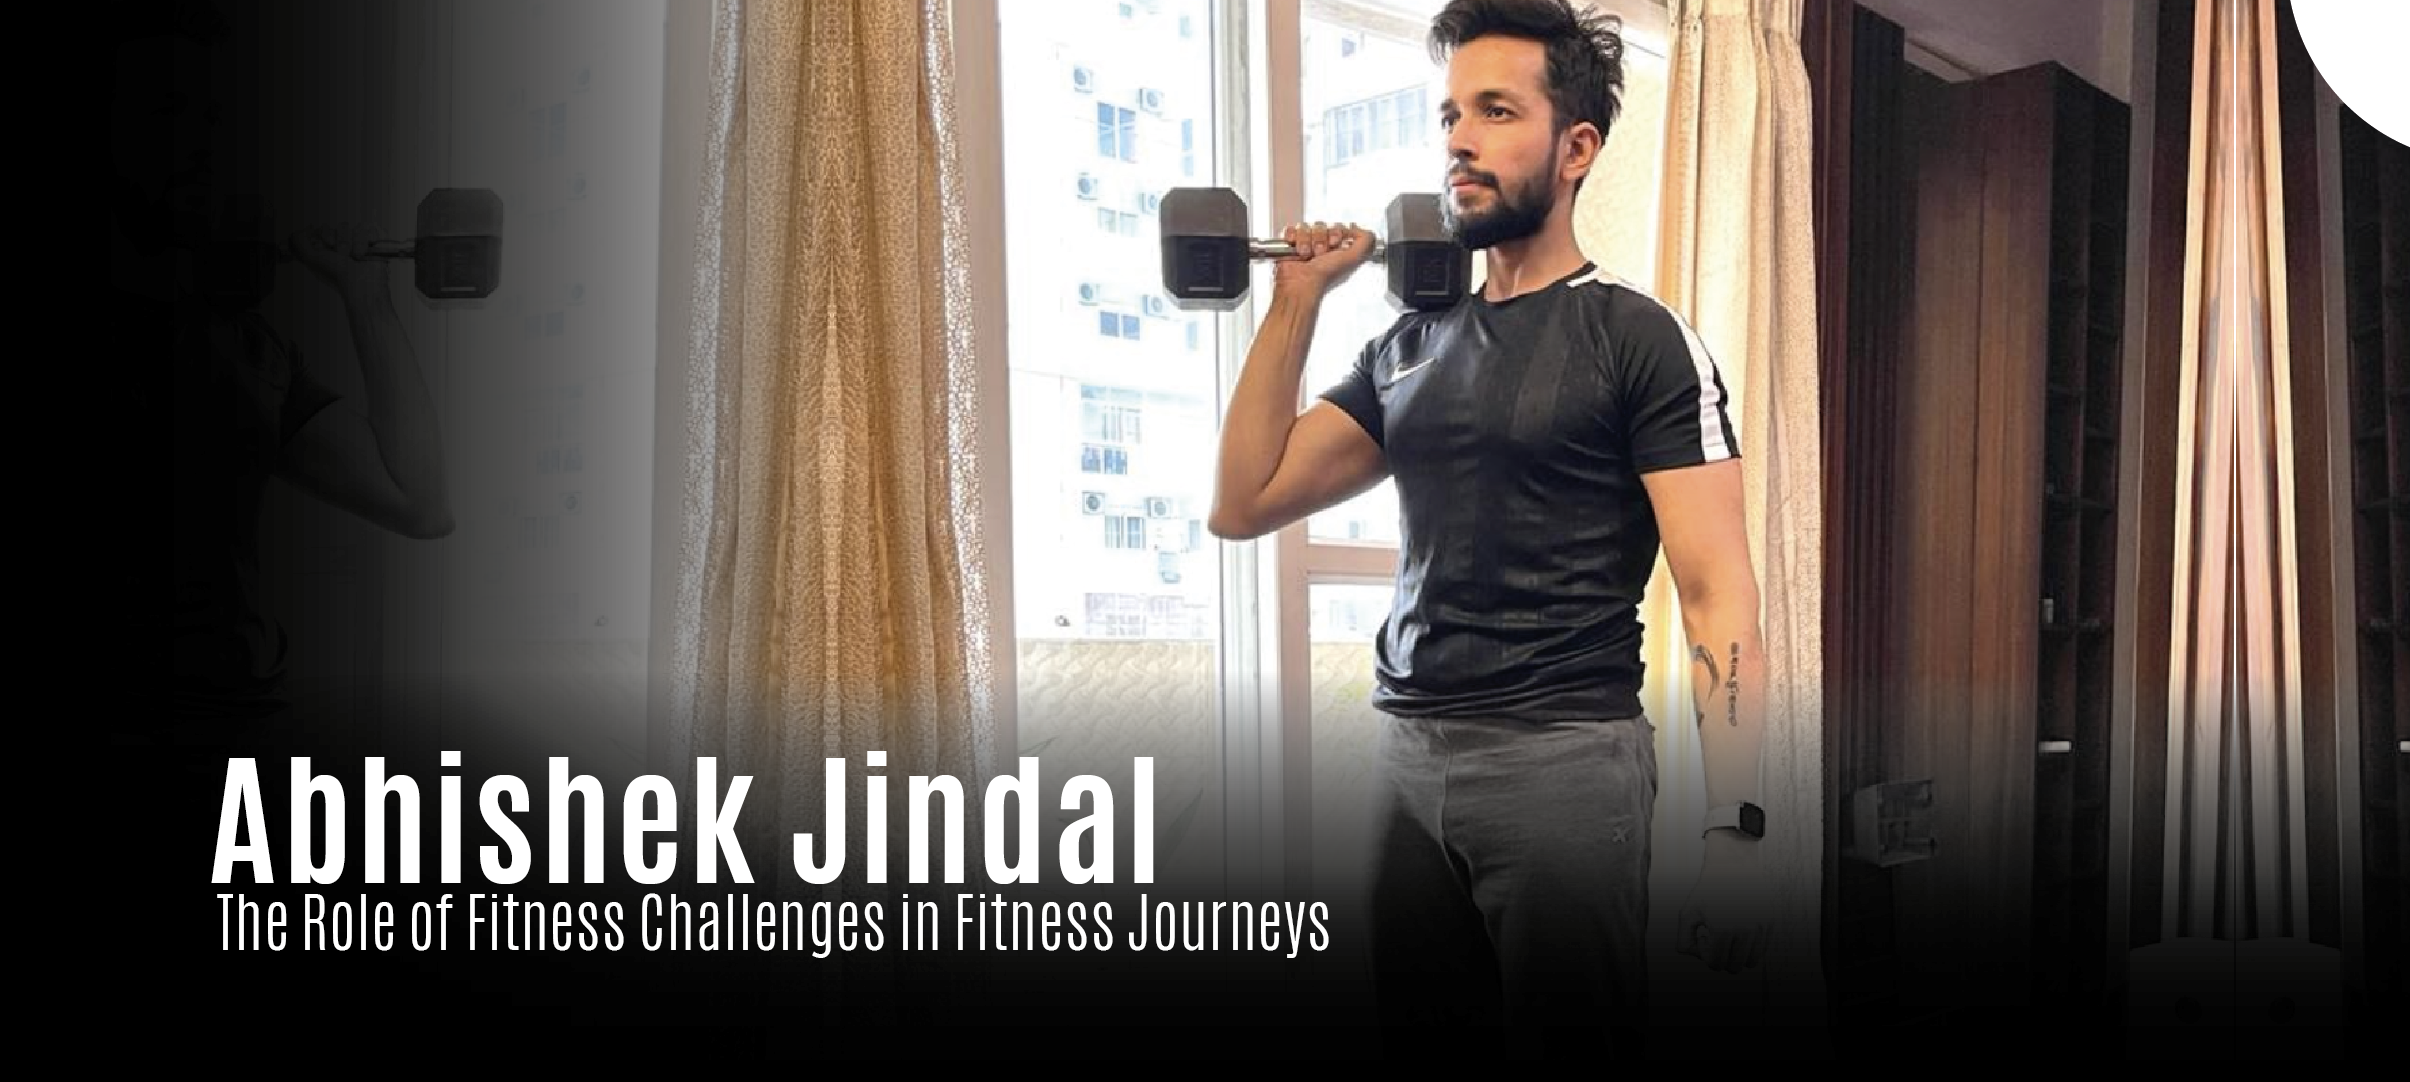 Abhishek Jindal transformed his live through his fitness journey and now he is doing that for others. 